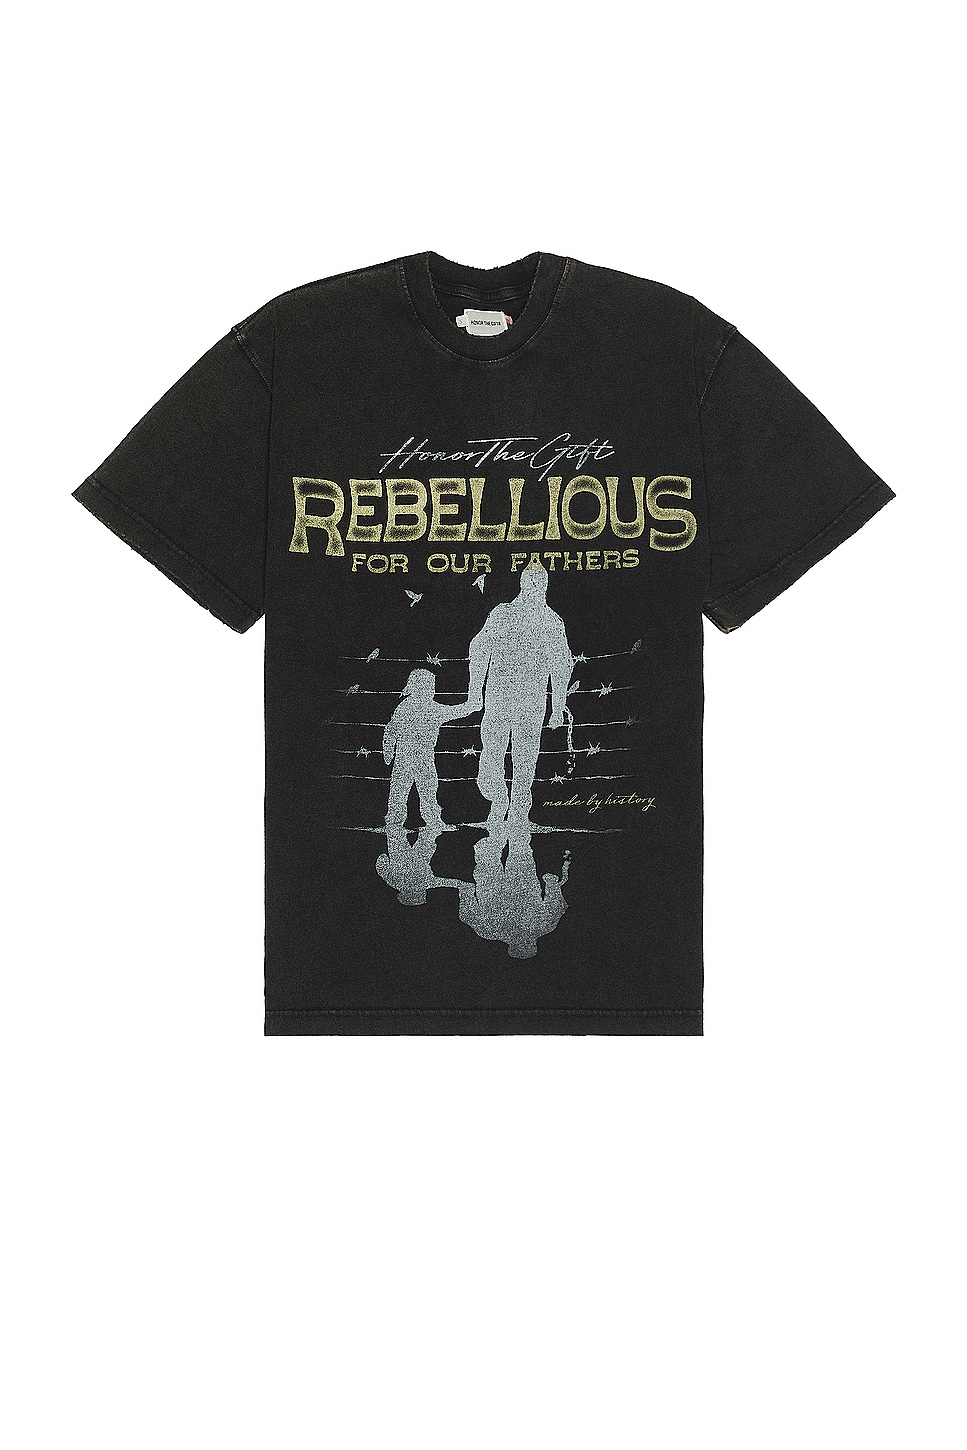 Image 1 of Honor The Gift A-spring Rebellious For Our Fathers Tee in Black